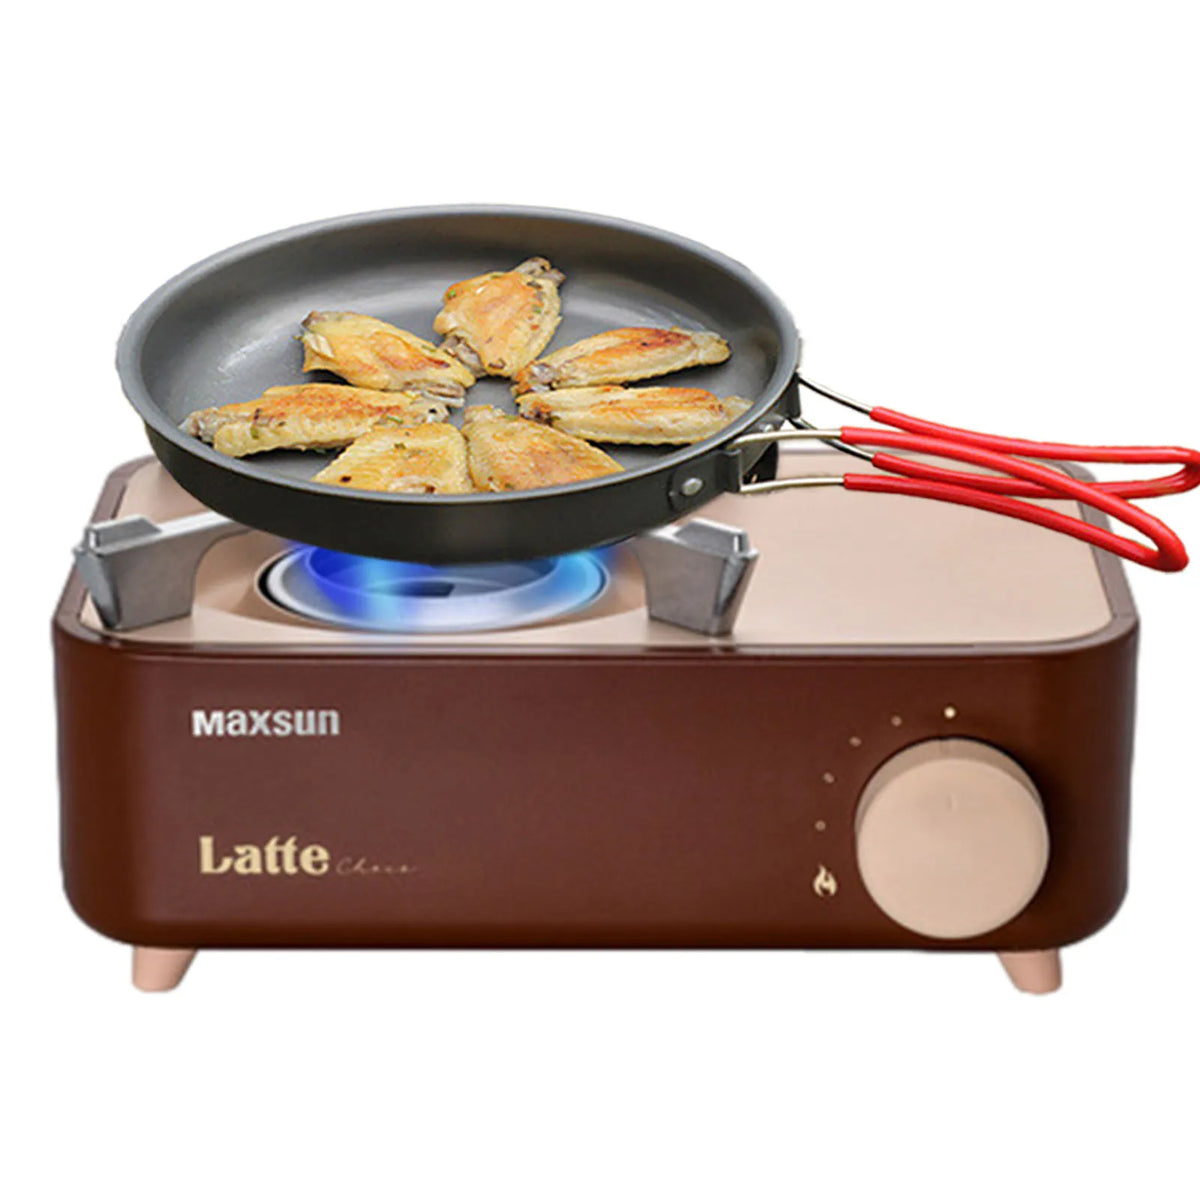 Camping   MINI Cassette Furnace Outdoor Camping Supplies Cooker Portable Cooking Stove BBQ Picnic Burner